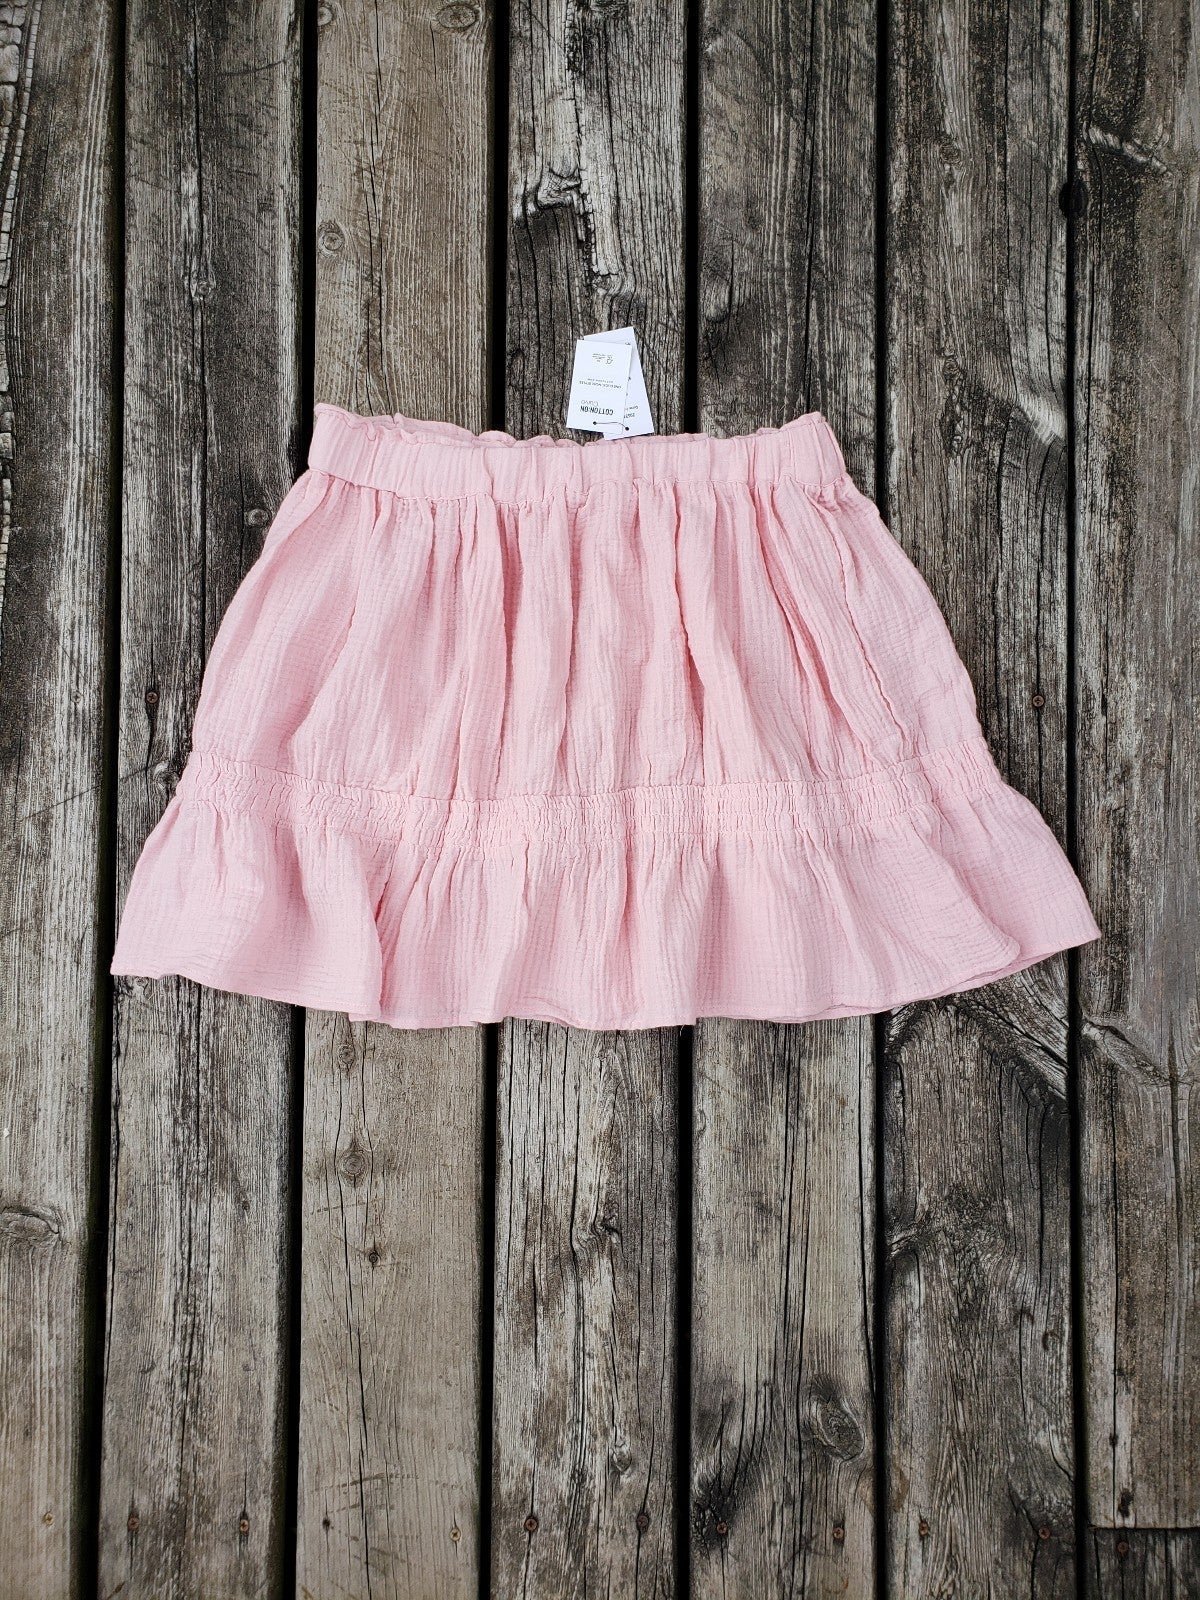 floor price Brand new!! NWT women´s Cotton On stretchy pink ruffle skirt size 12 PCvyF6CIF for sale